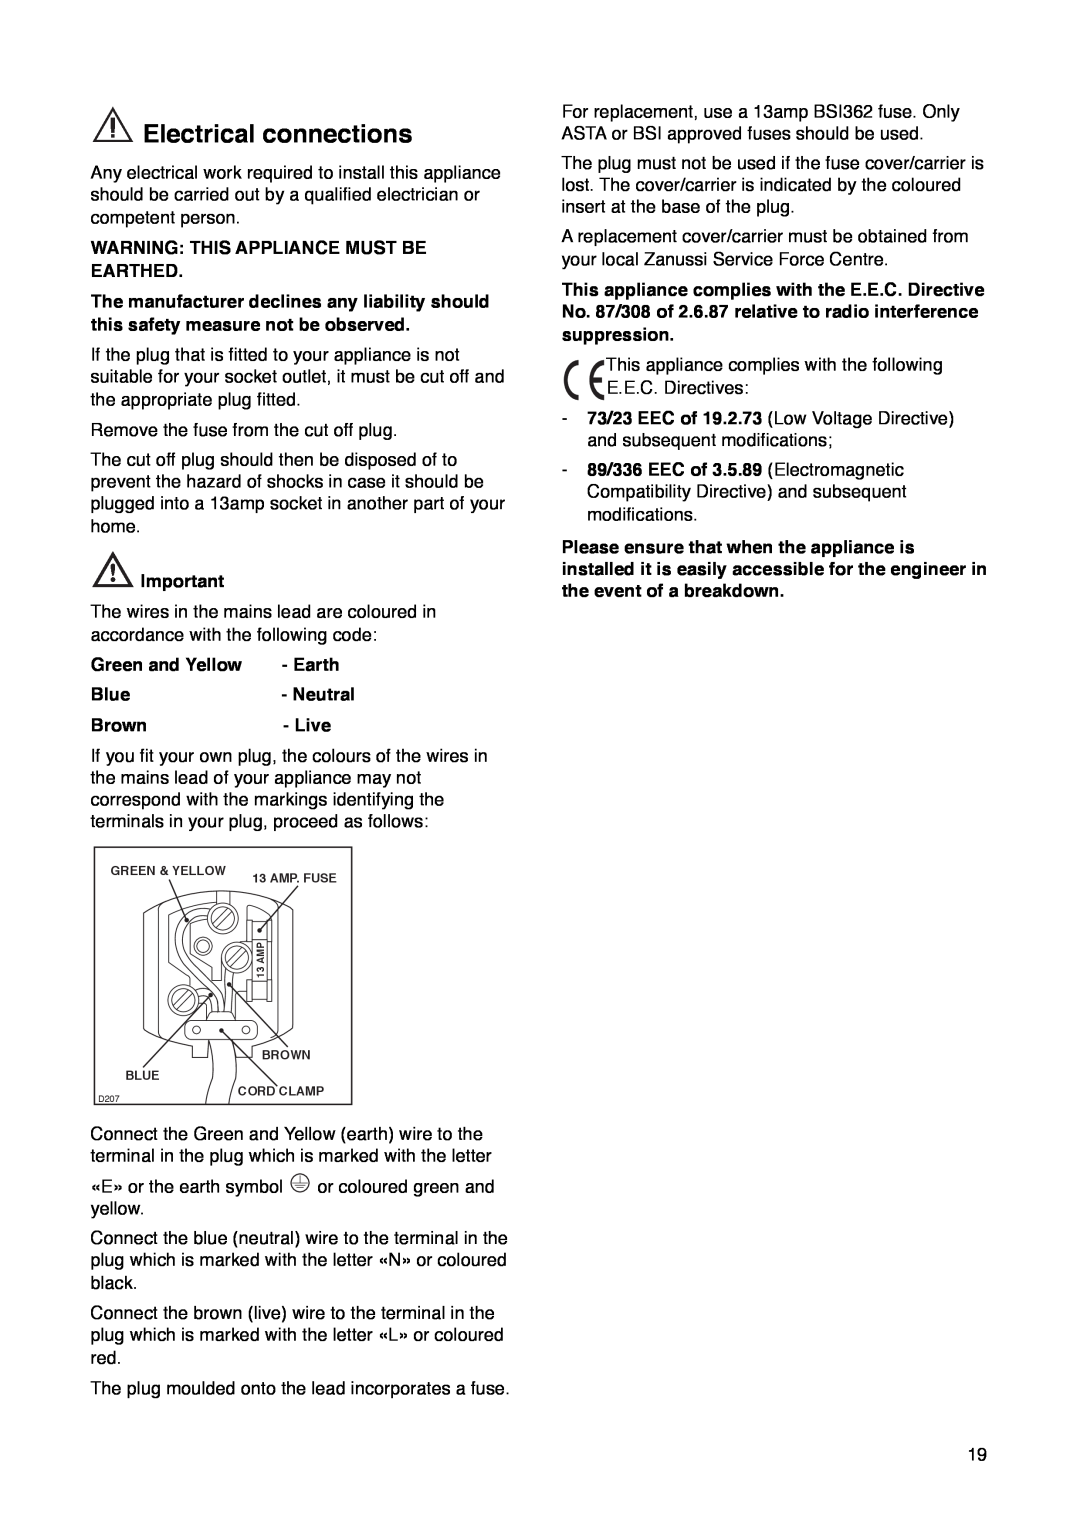 Zanussi ZKR 60/30 R manual Electrical connections, Warning This Appliance Must Be Earthed, Green and Yellow 